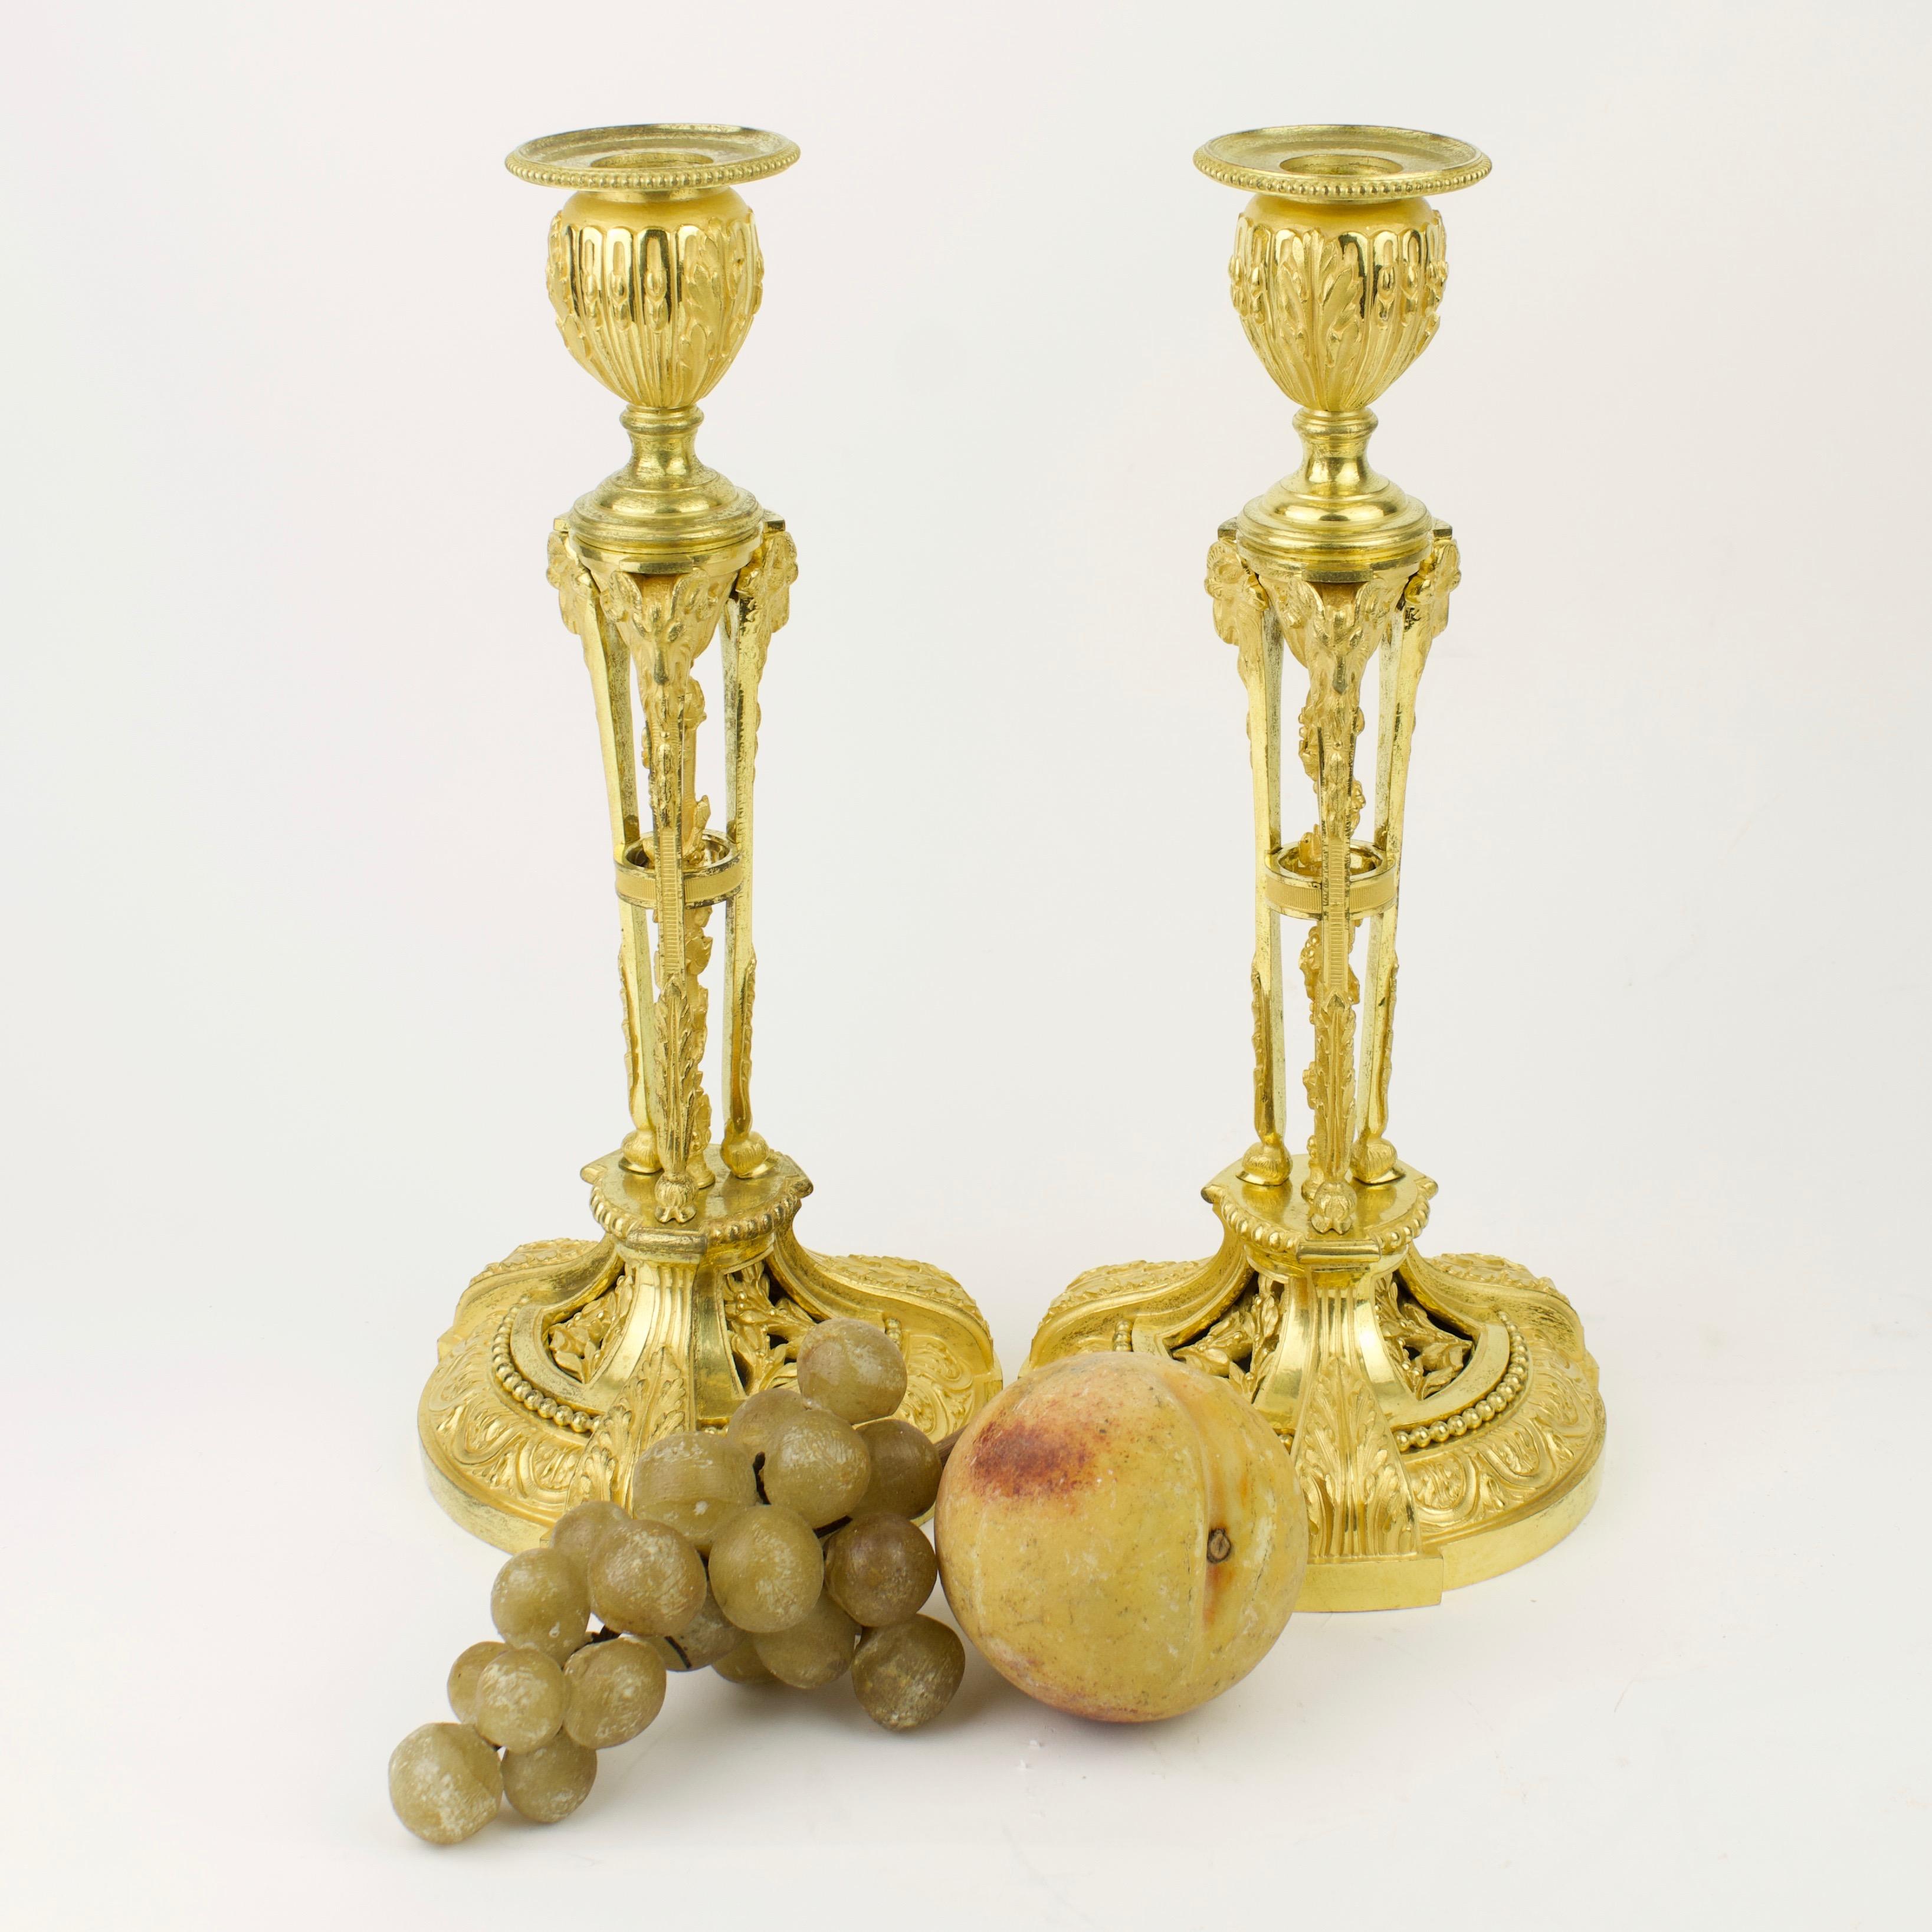 Pair of Early 19th Century Louis XVI Gilt Bronze Candlesticks after Martincourt For Sale 8